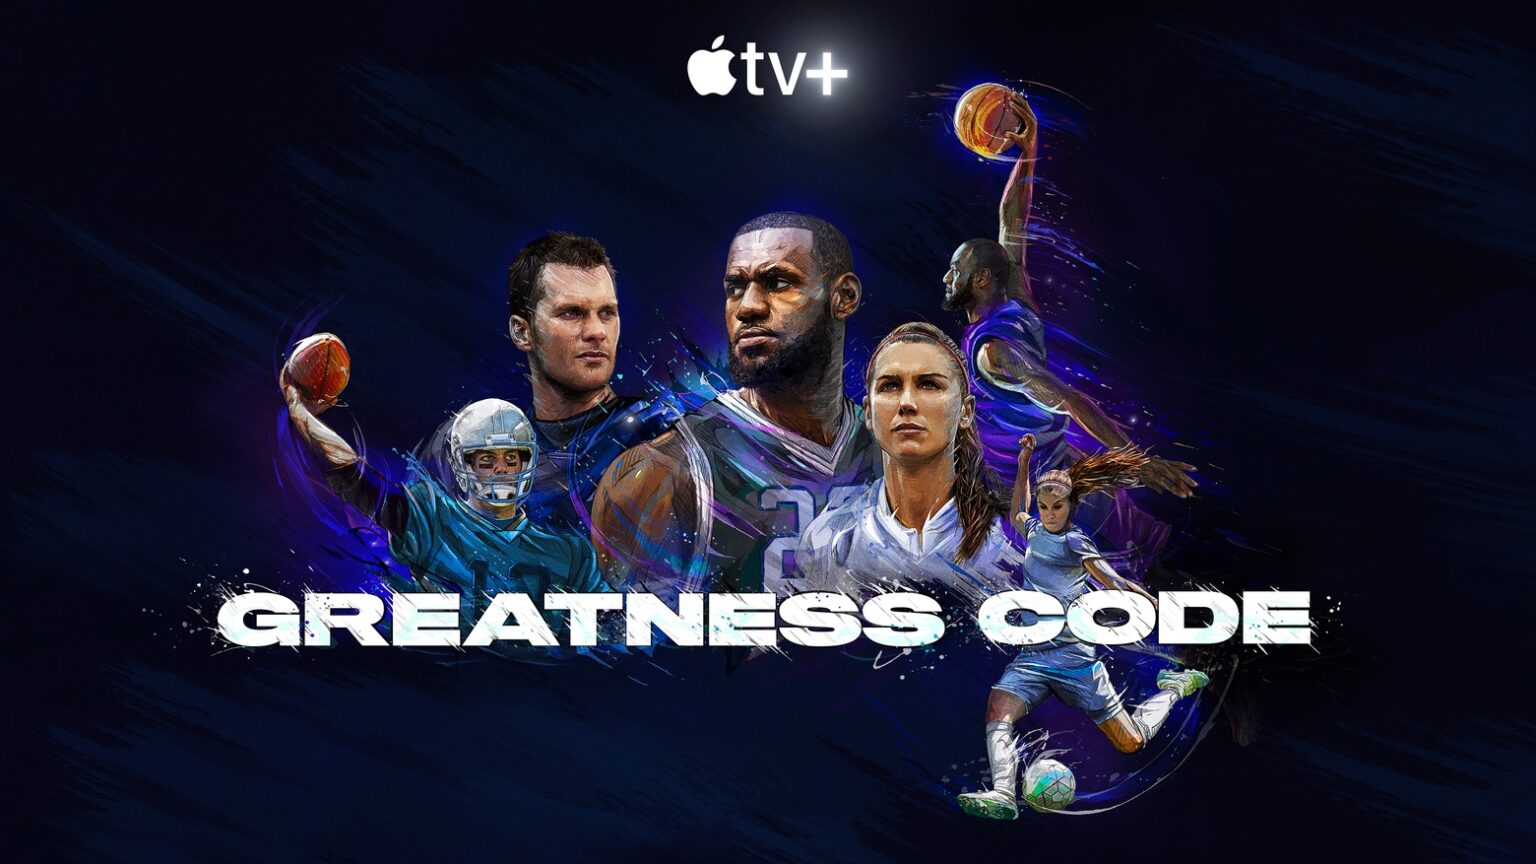 ‘Greatness Code’ debuted from Apple TV+ on July 10, 2020